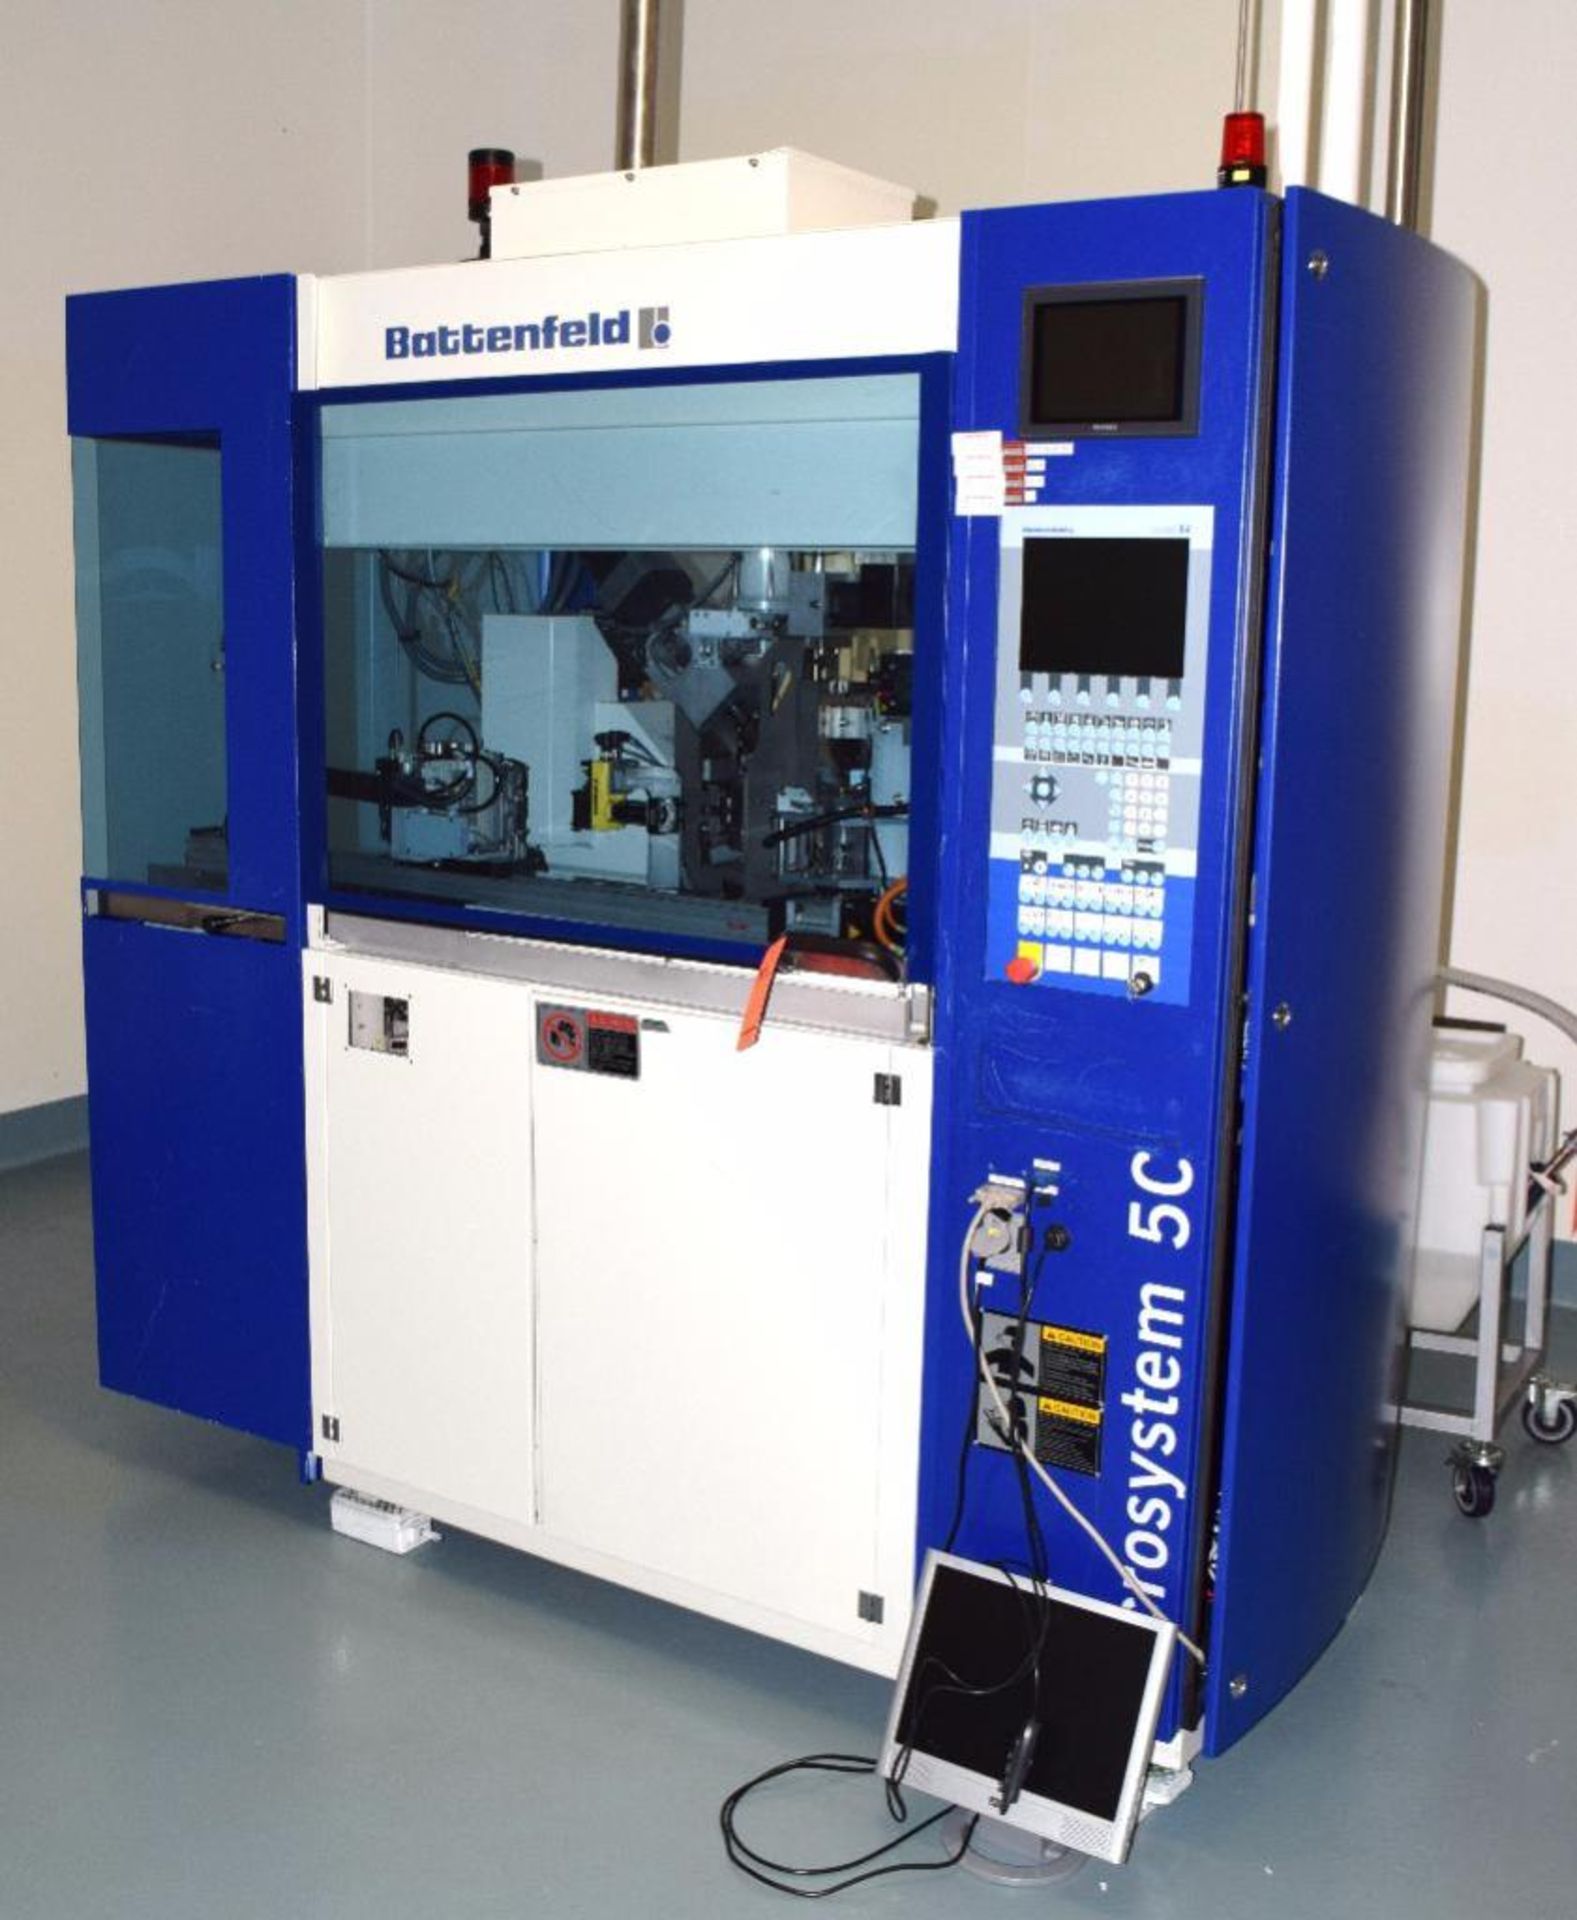 Battenfeld Microsystem 50 Micro Injection Mold Machine, Model MM 50/0. Approximate 50 ton clamp forc - Image 19 of 26